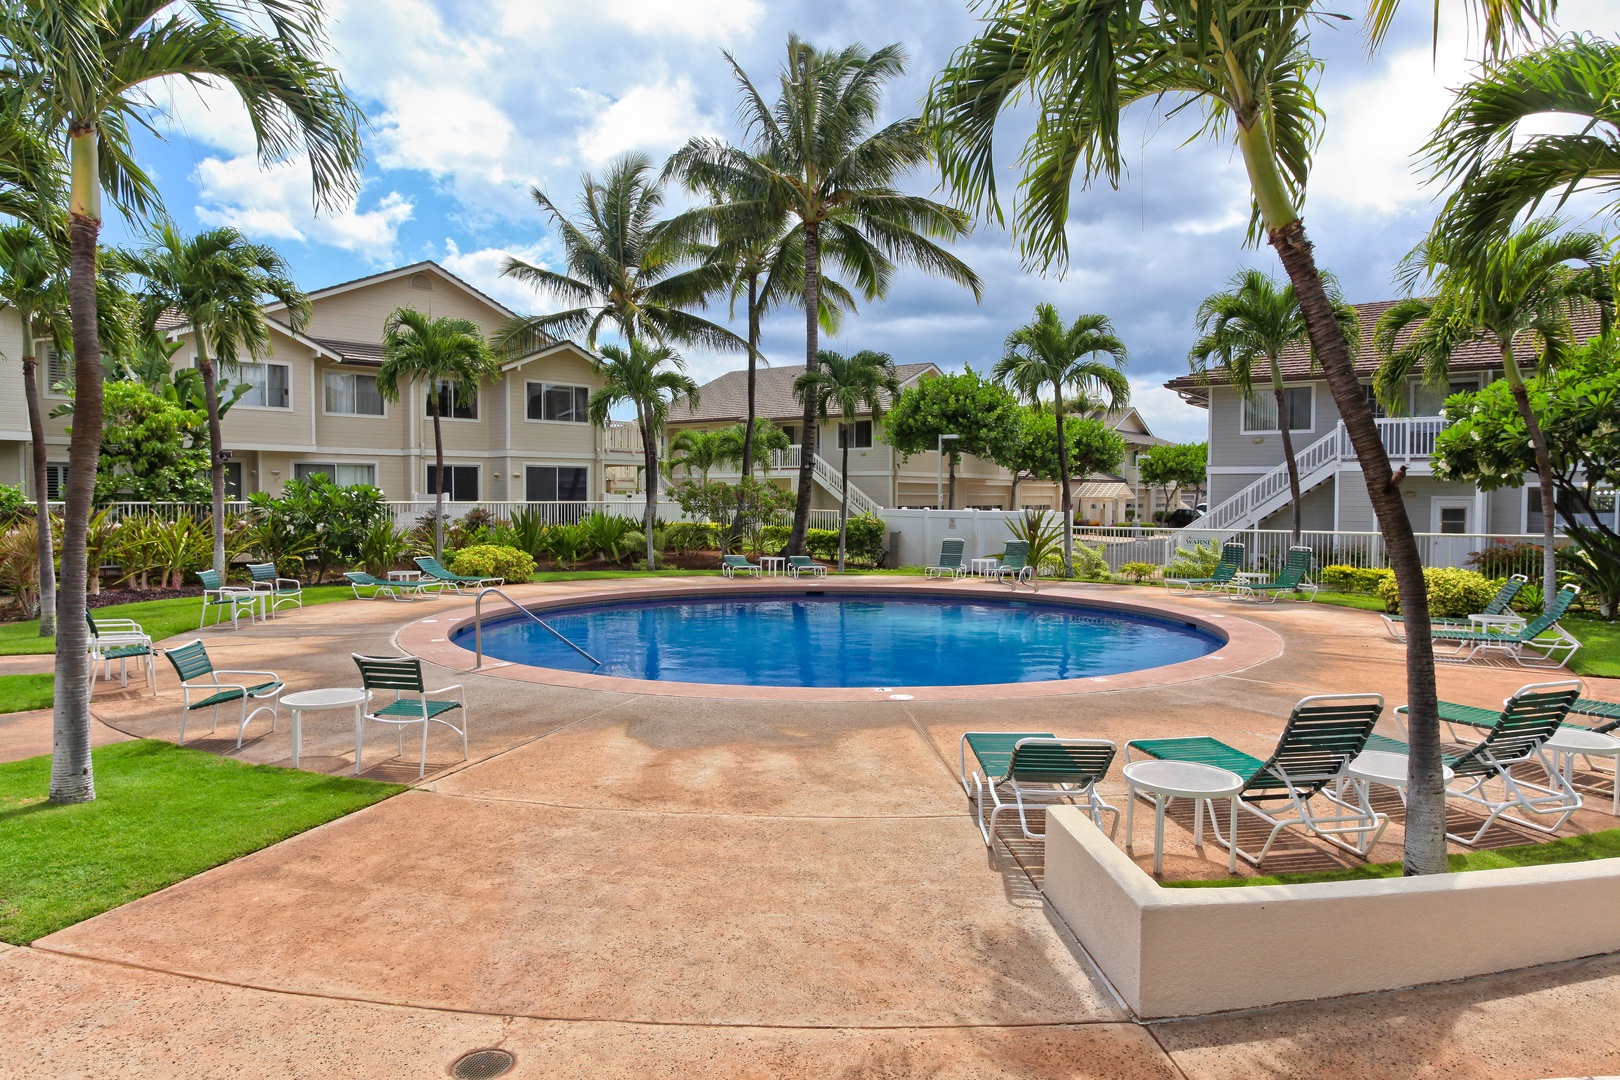 Kapolei Vacation Rentals, Fairways at Ko Olina 20G - Go for a swim in the sparkling waters and rest in the lounge chairs at the community pool.